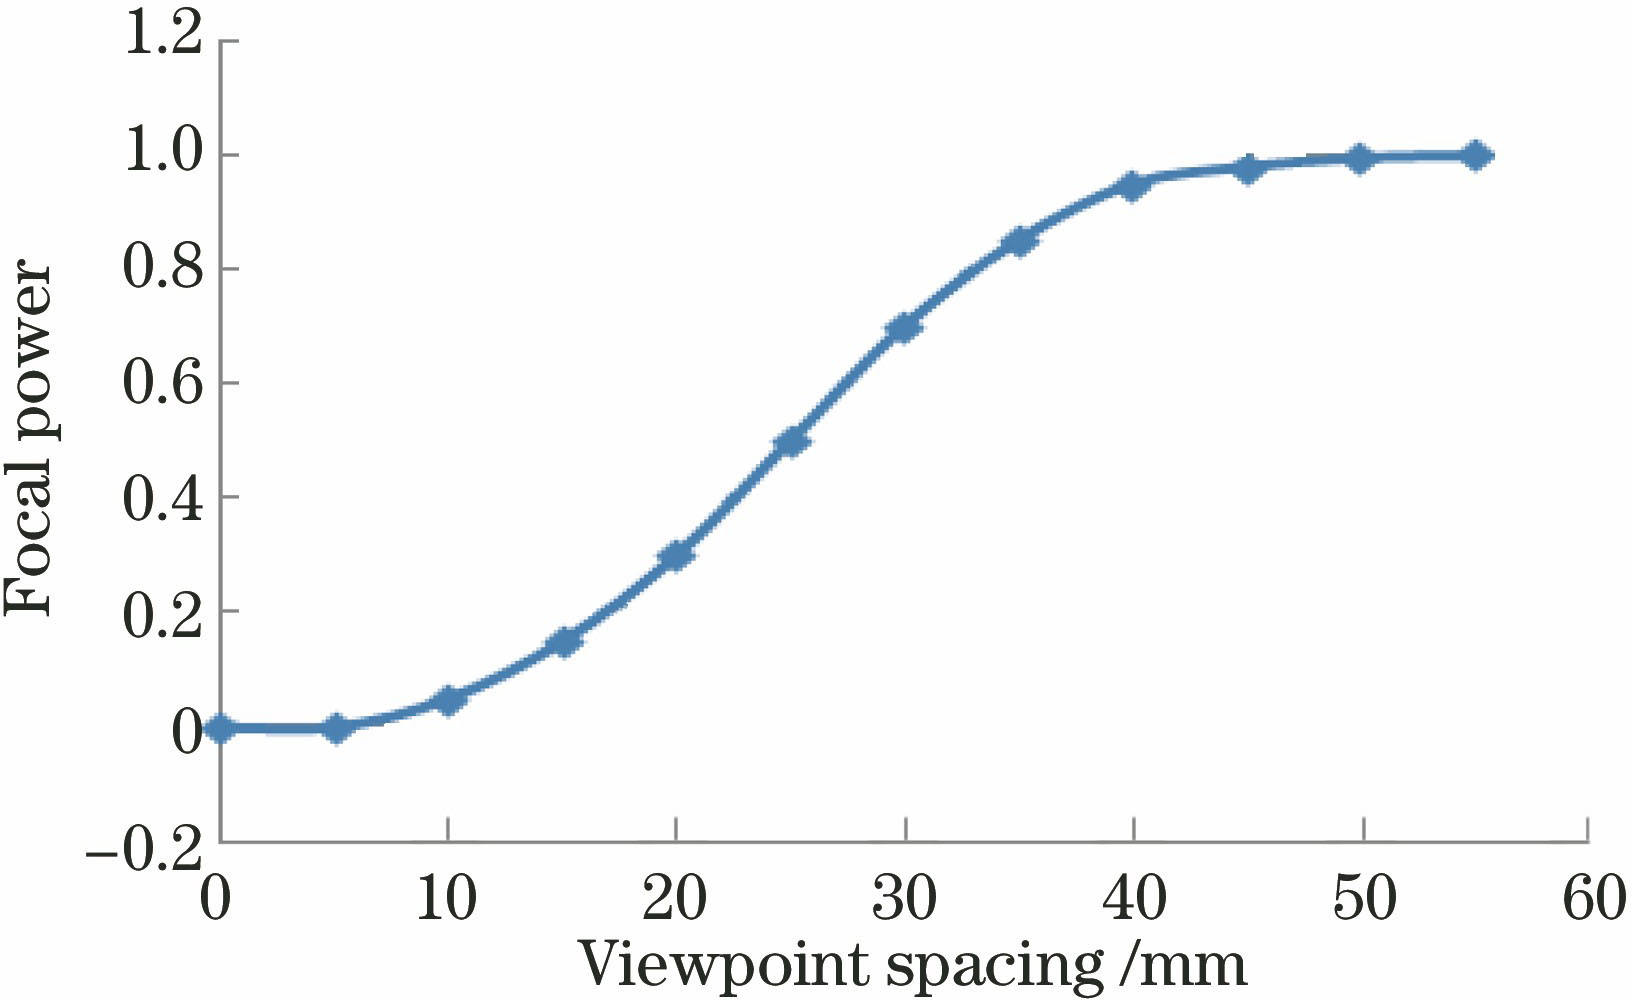 Relationship between focal power of tumor lesion tissue and viewpoint spacing